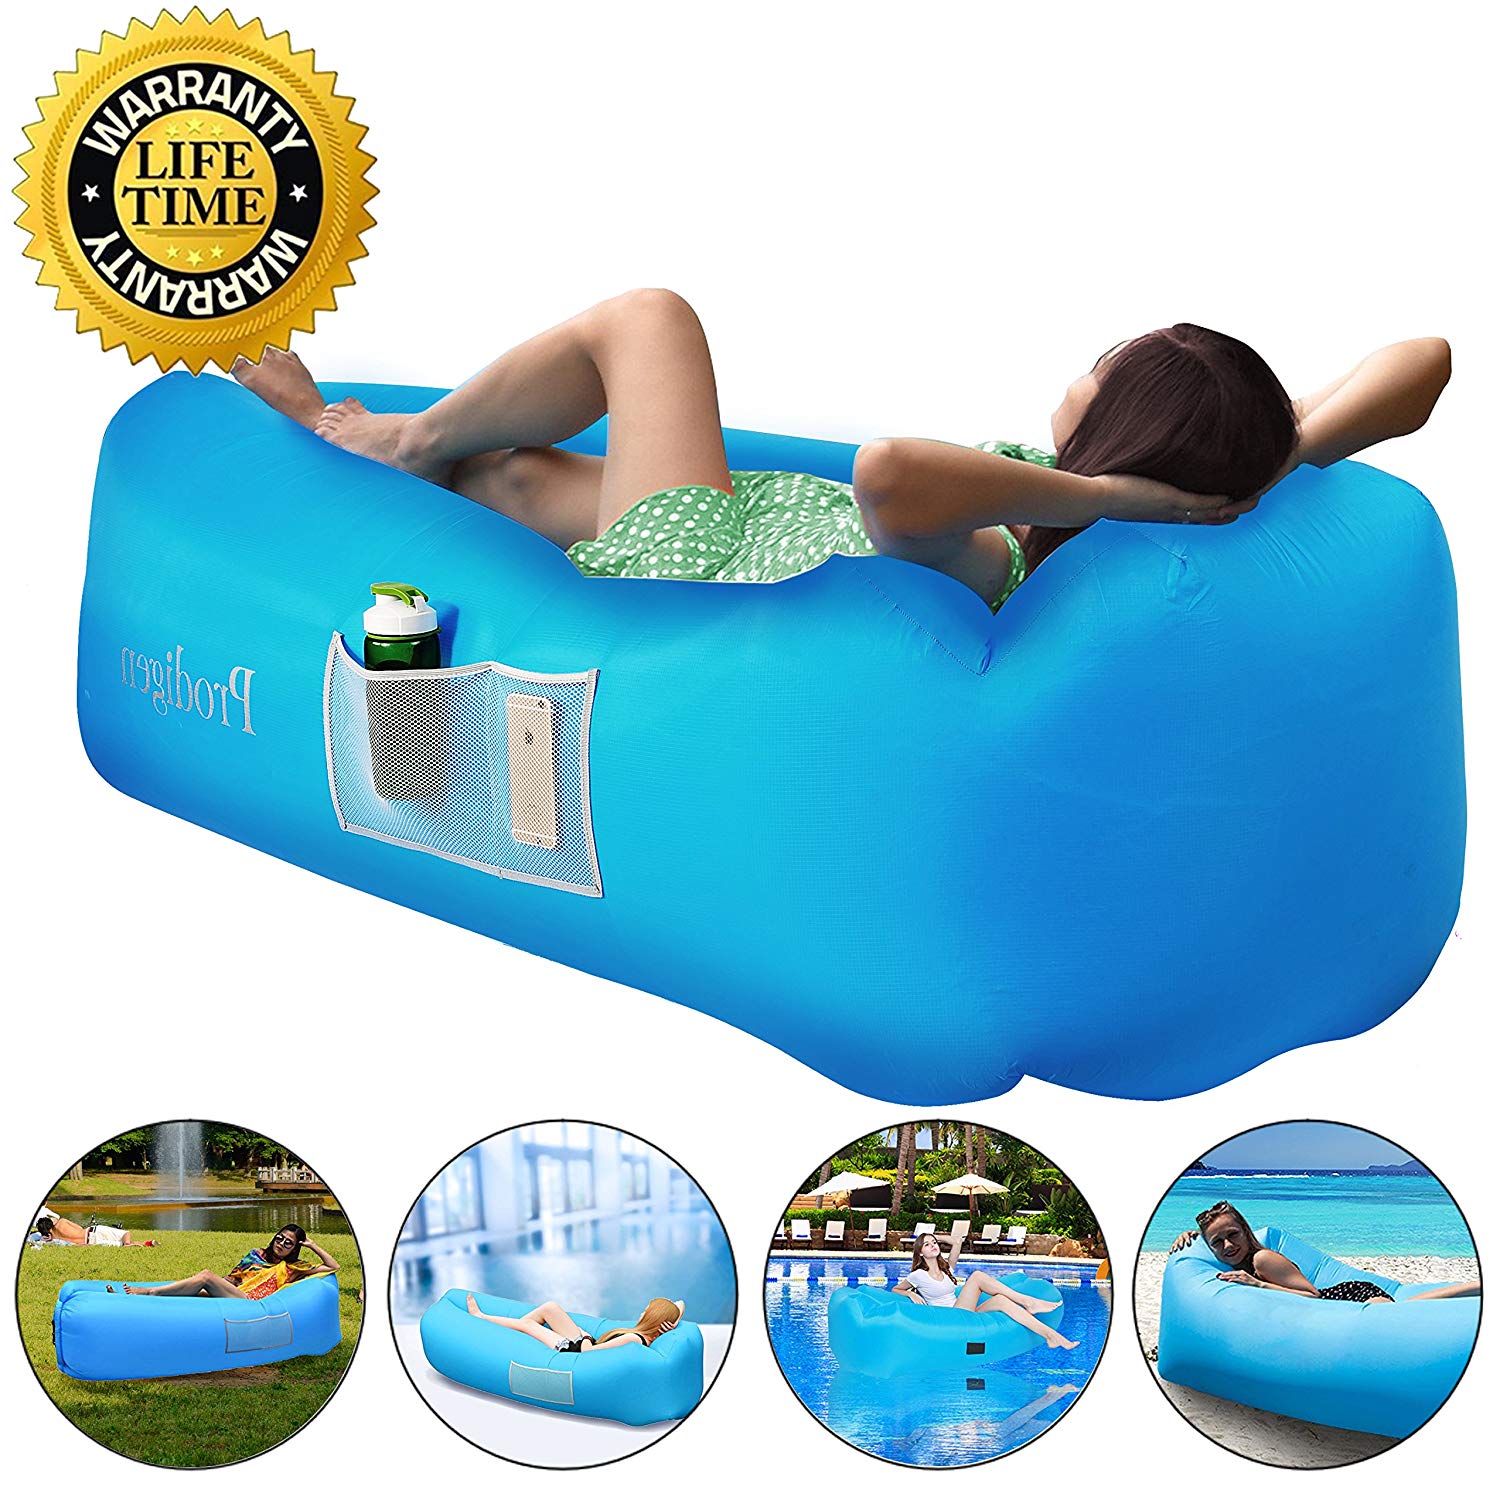 Prodigen Inflatable Lounger Chair, Air Sofa Inflatable Couch Outdoor Anti-Air Leaking Waterproof Portable Inflatable Hammock Air Couch for Pool, Floor, Camping, Beach